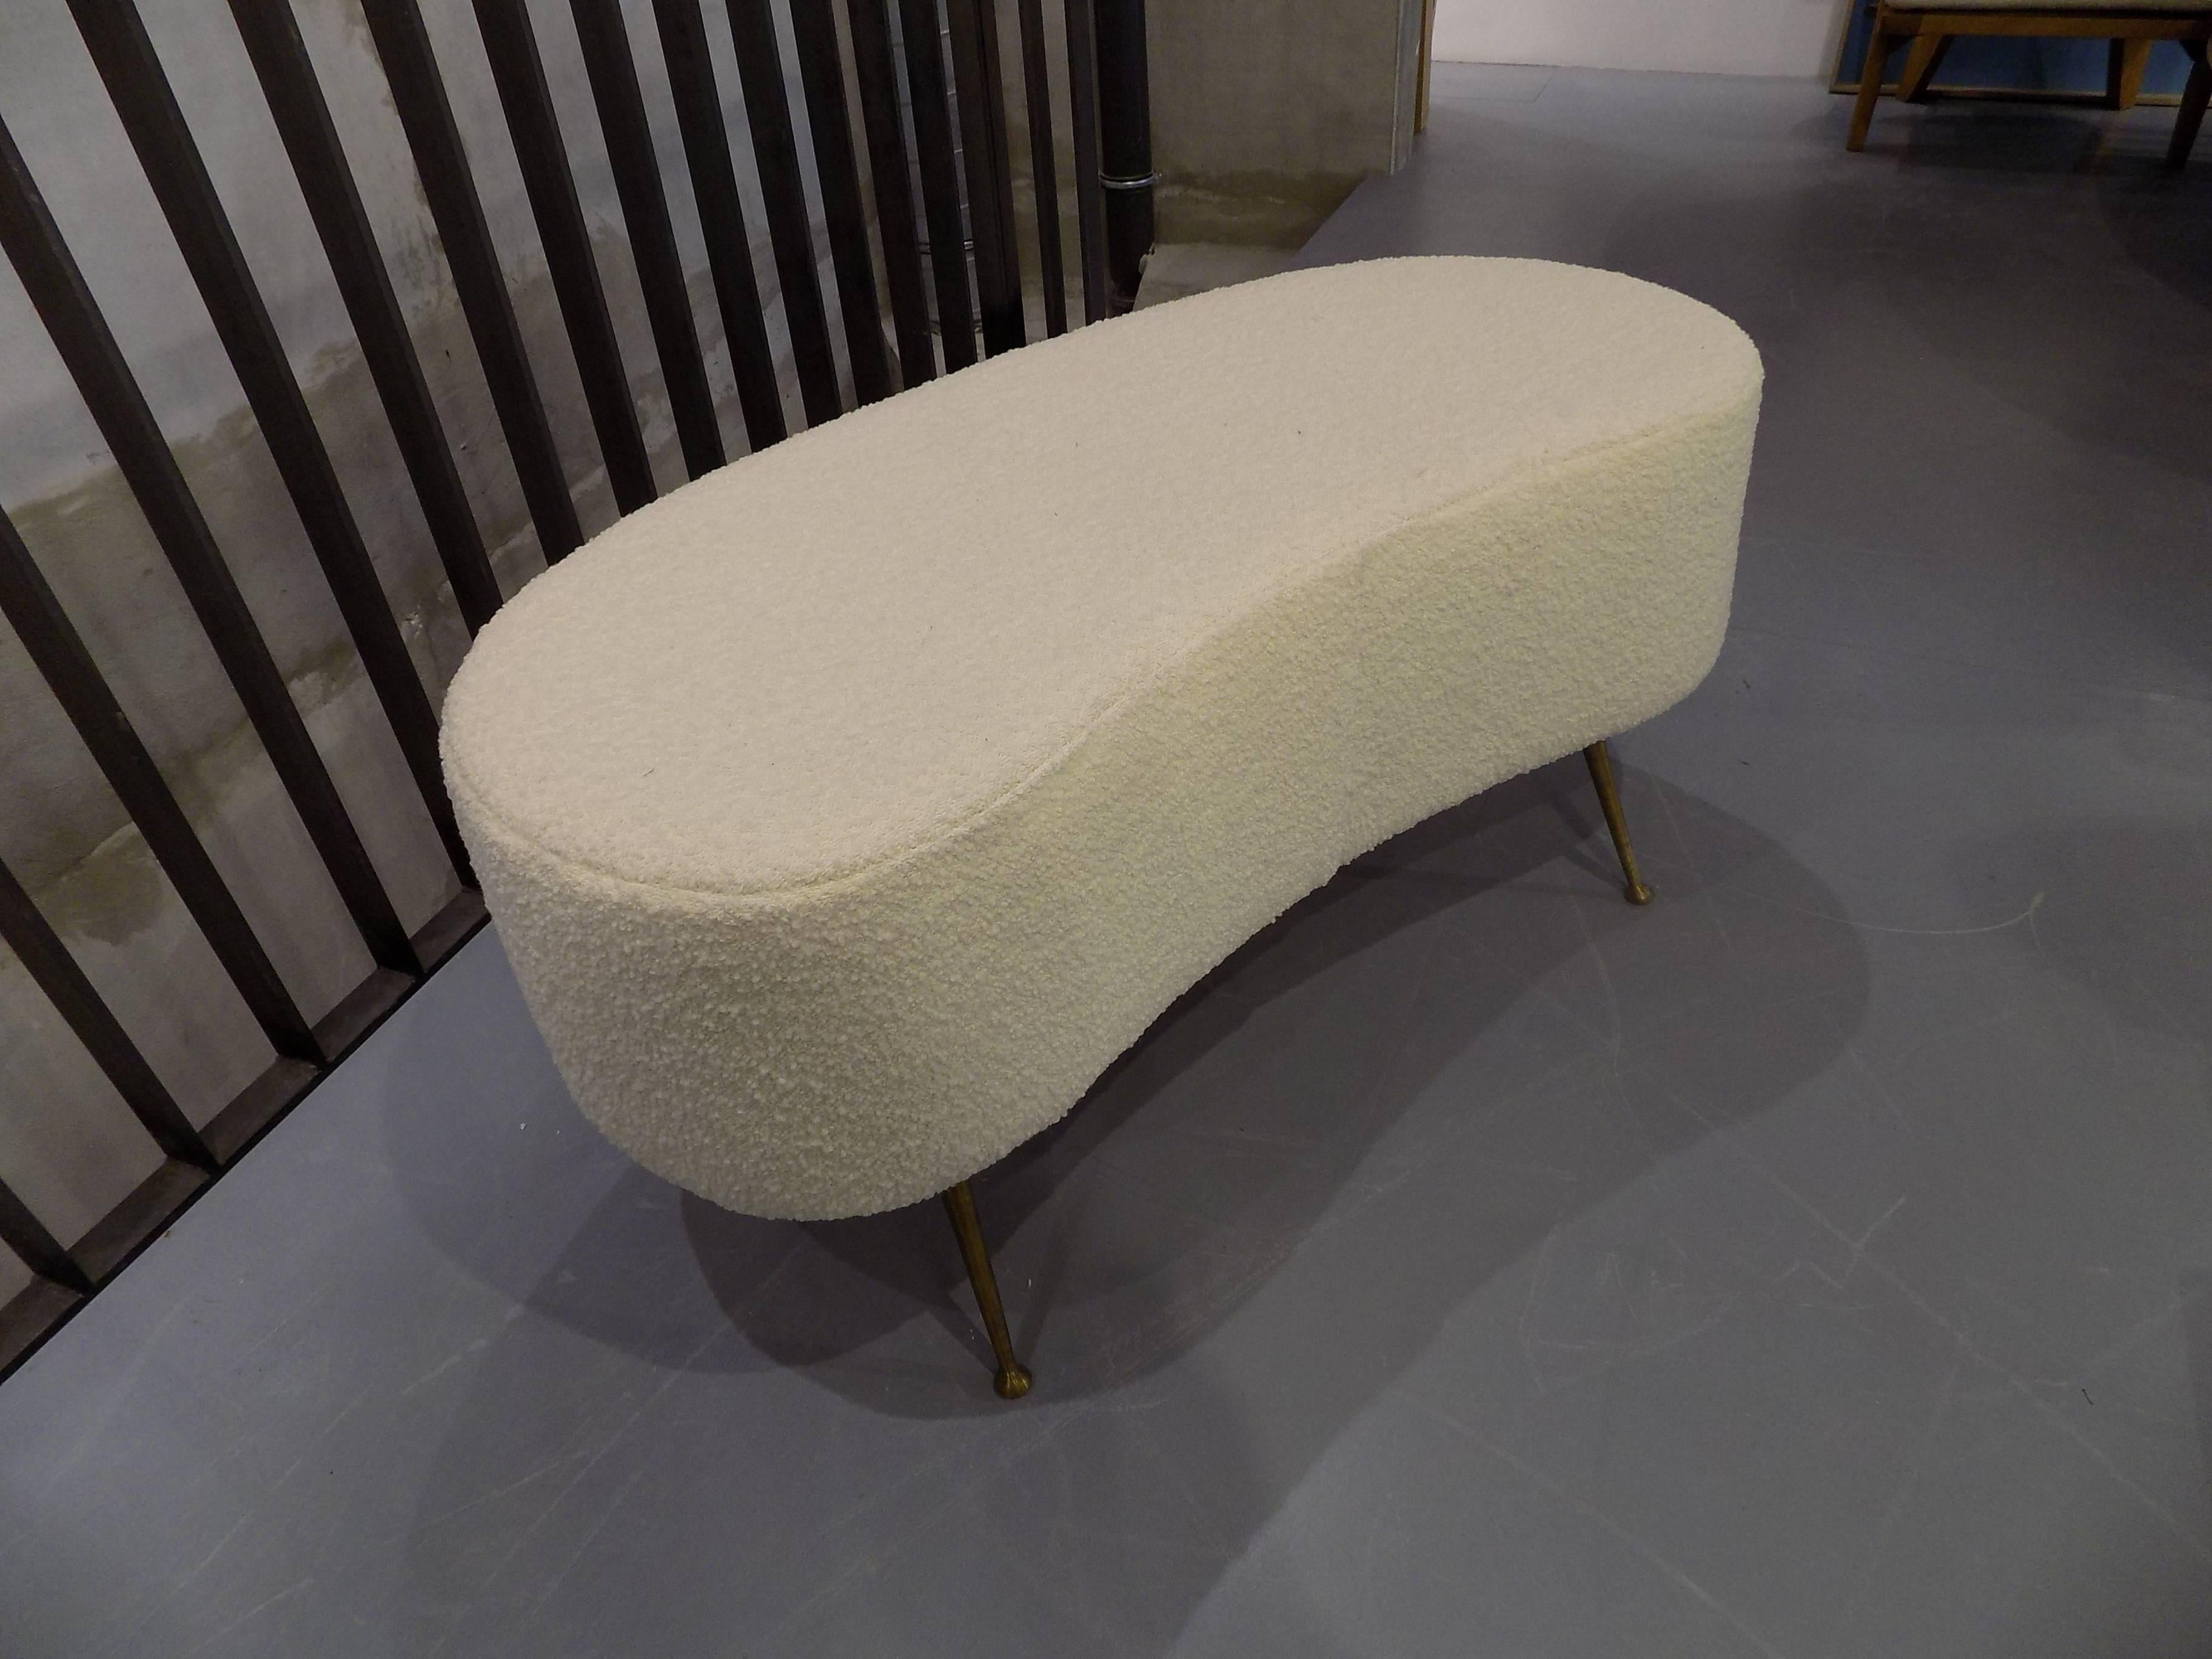 Huge Bench with wool and brass feet. Contemporary edition made in Italy and designed by L'Atelier 55.